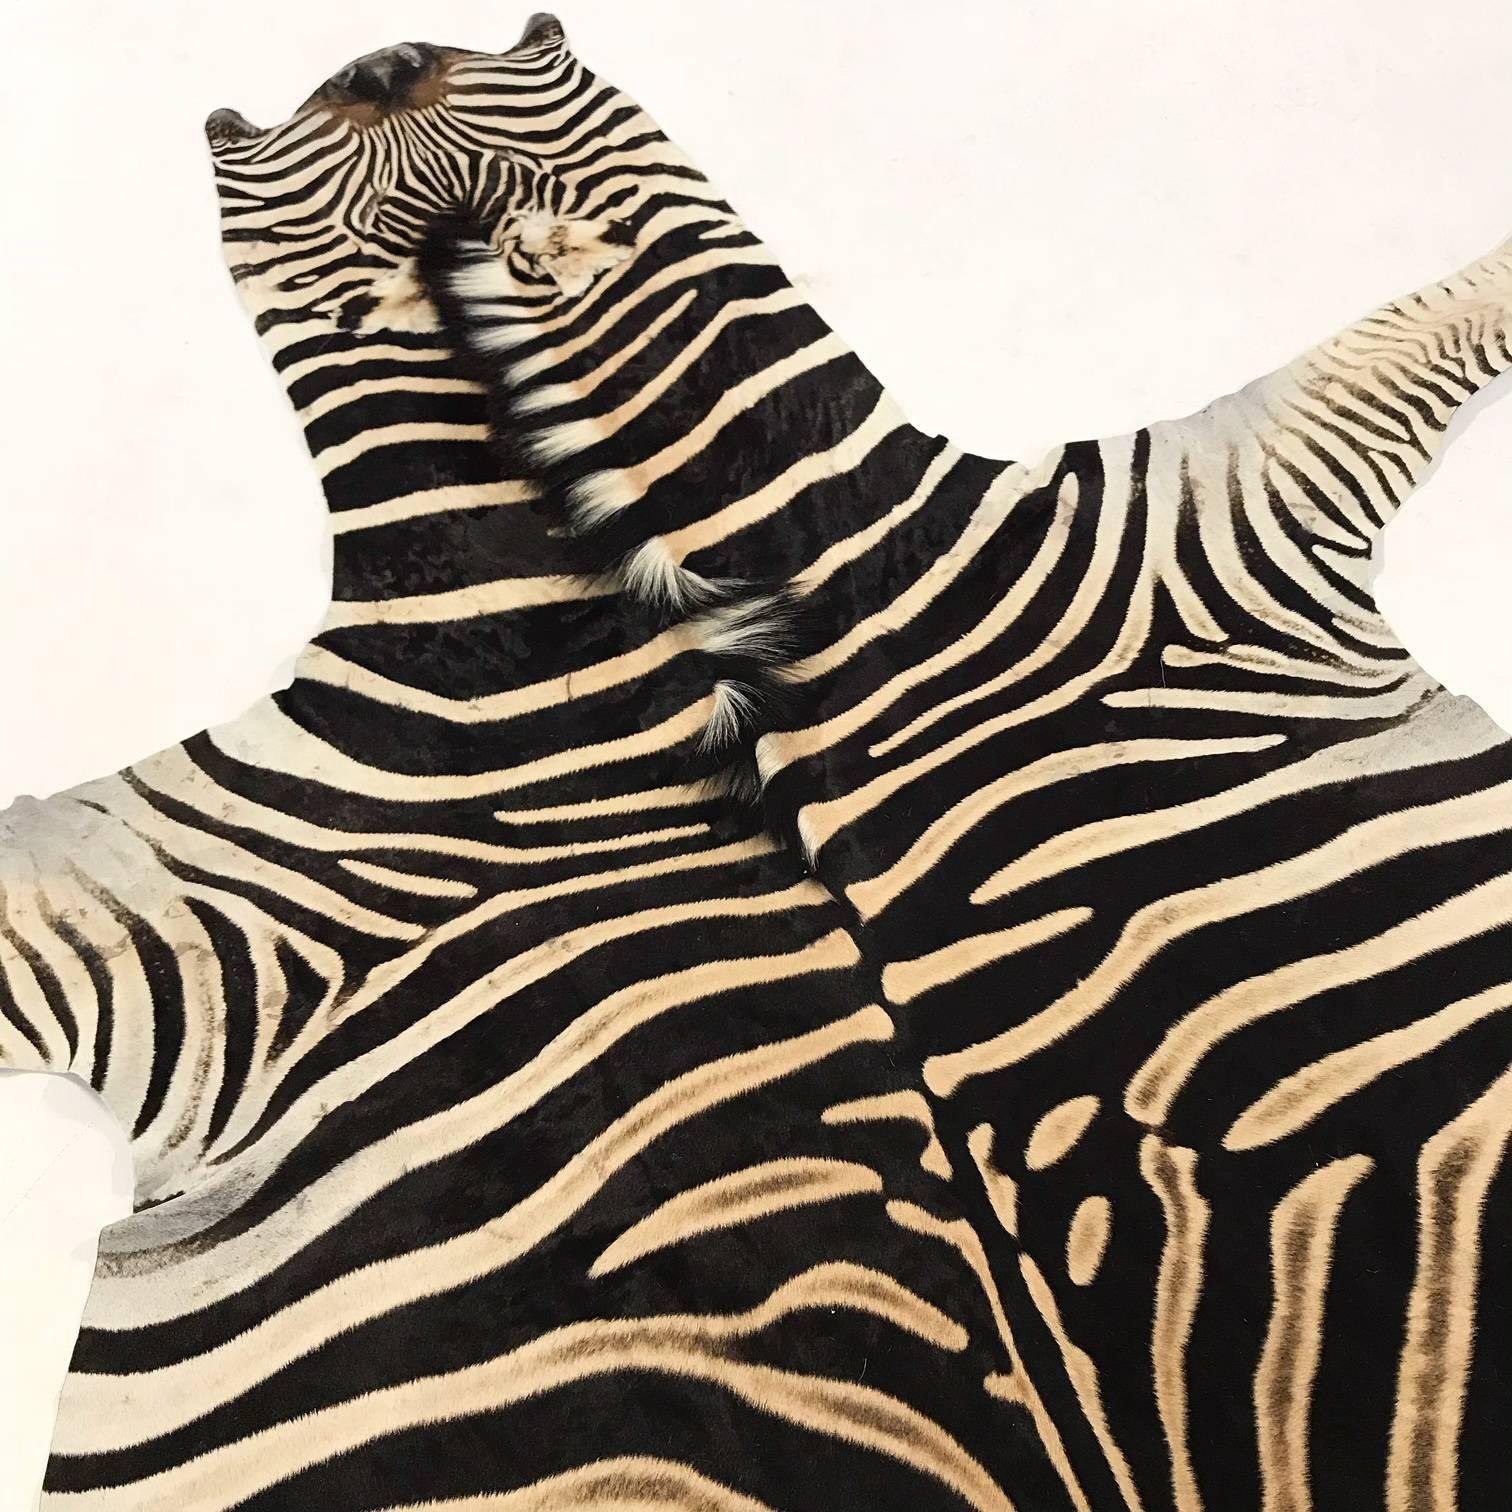 Zebra hides are hand selected with a critical eye for their one-of-a-kind coloring, stripe patterns, and natural markings by our team. Each hide is unique and meets our high standards of hair quality, tanning excellence, and size. Zebra hide rugs